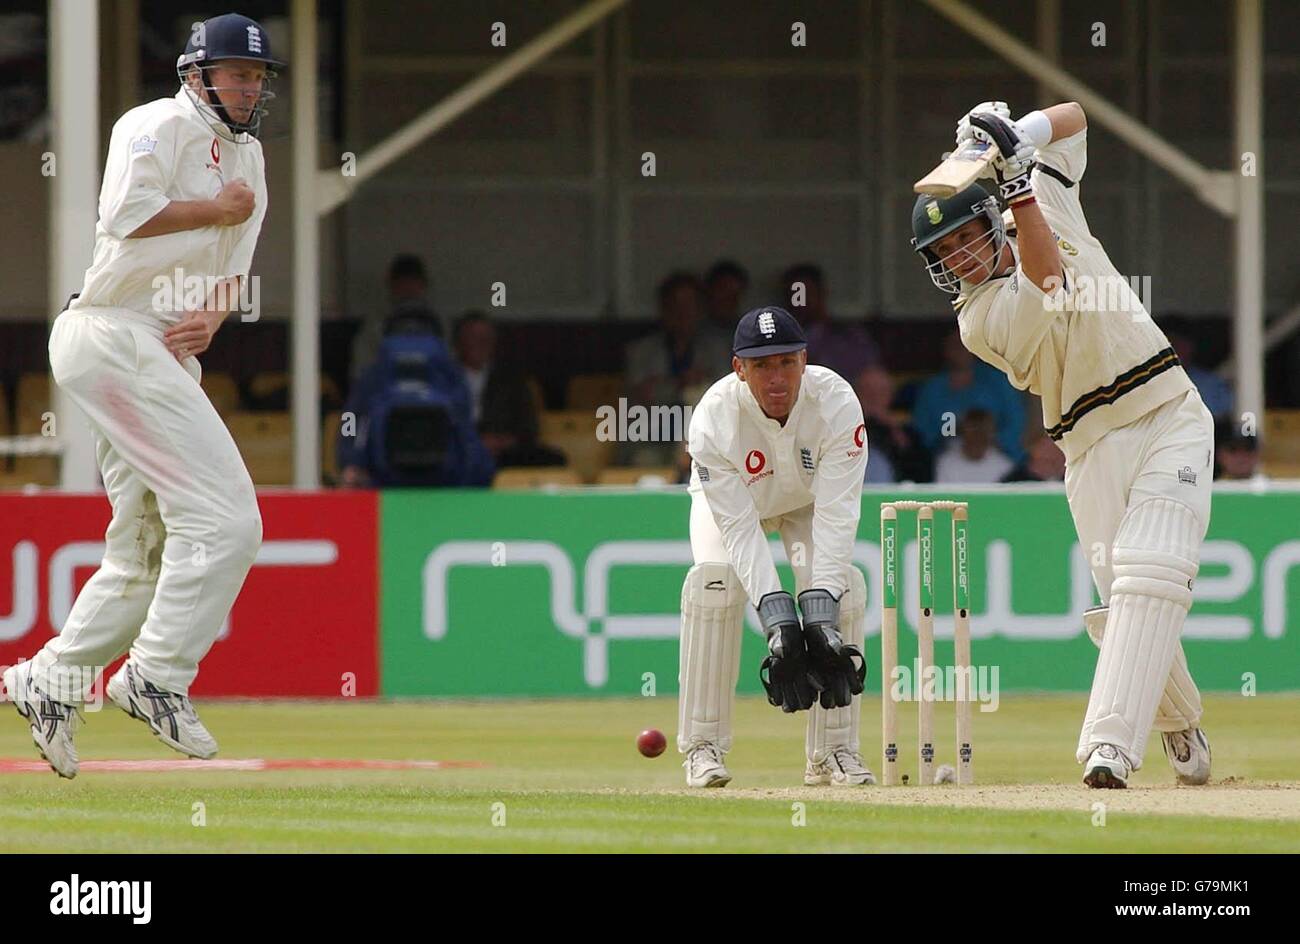 Boeta Dippenaar of South Africa bats against England during the third day of the npower Test at Edgbaston. Stock Photo